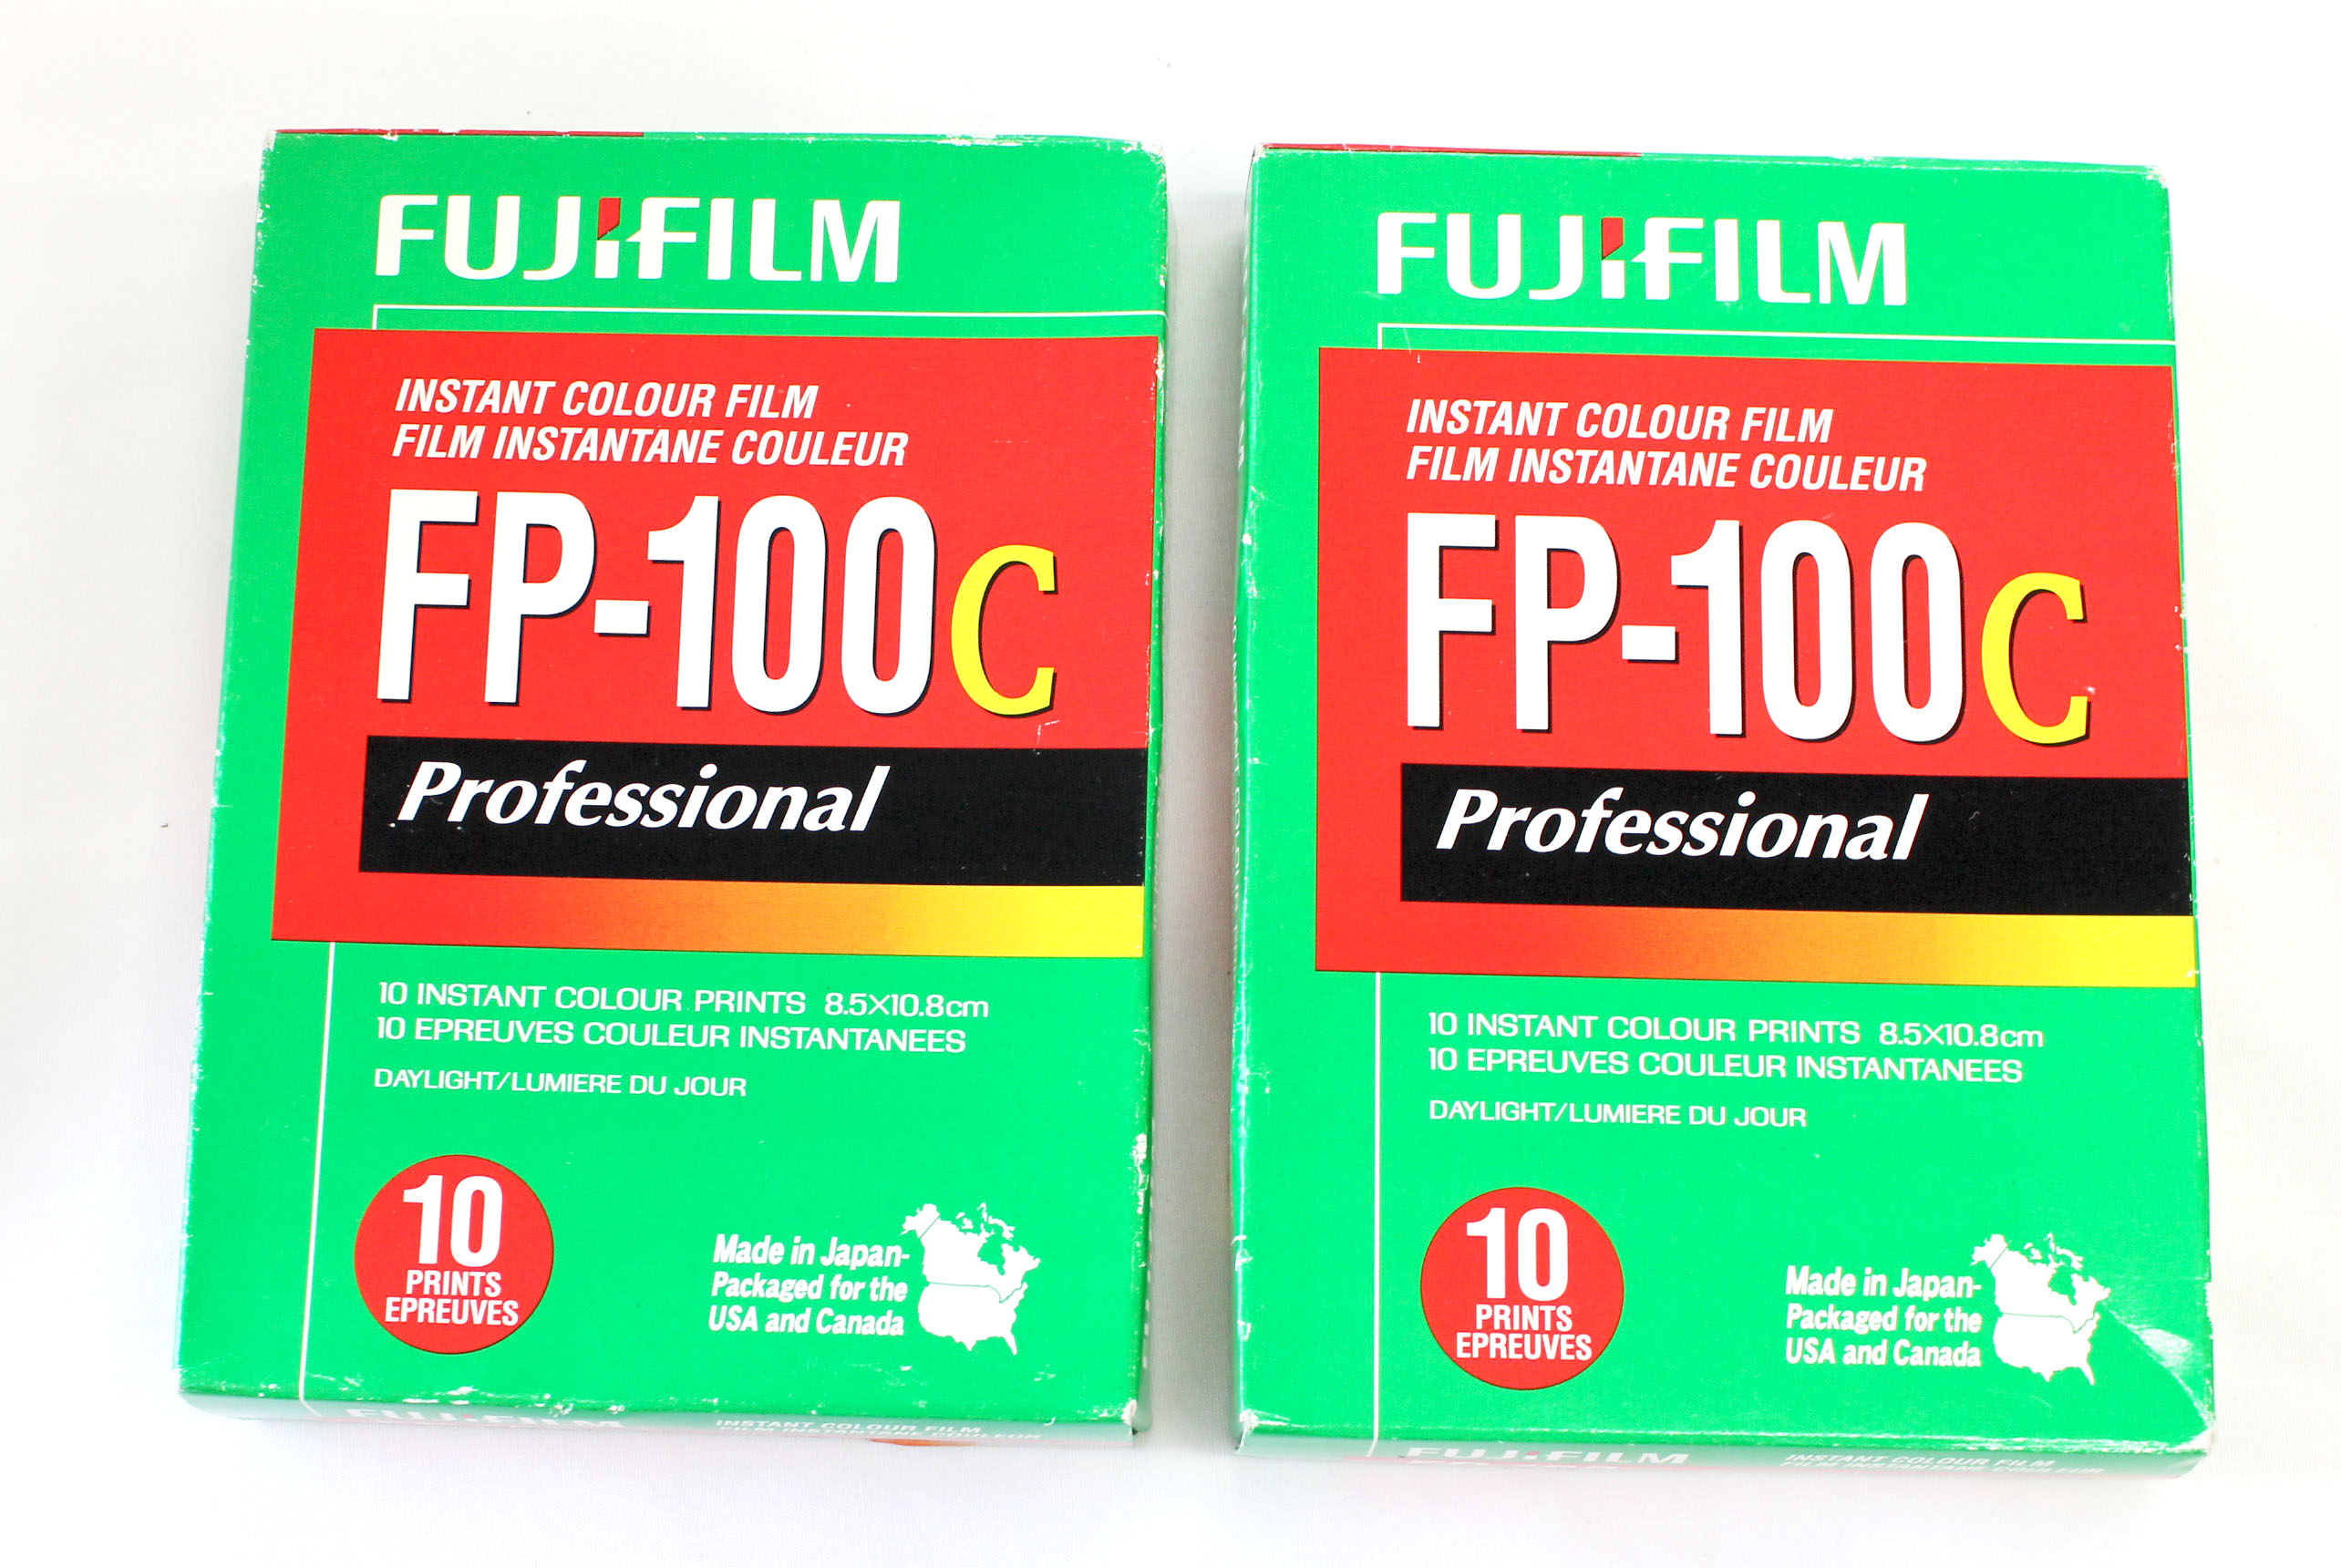 [New] Fujifilm FP-100C Professional Instant Color Film Set of 2 (Exp 2009) from Japan